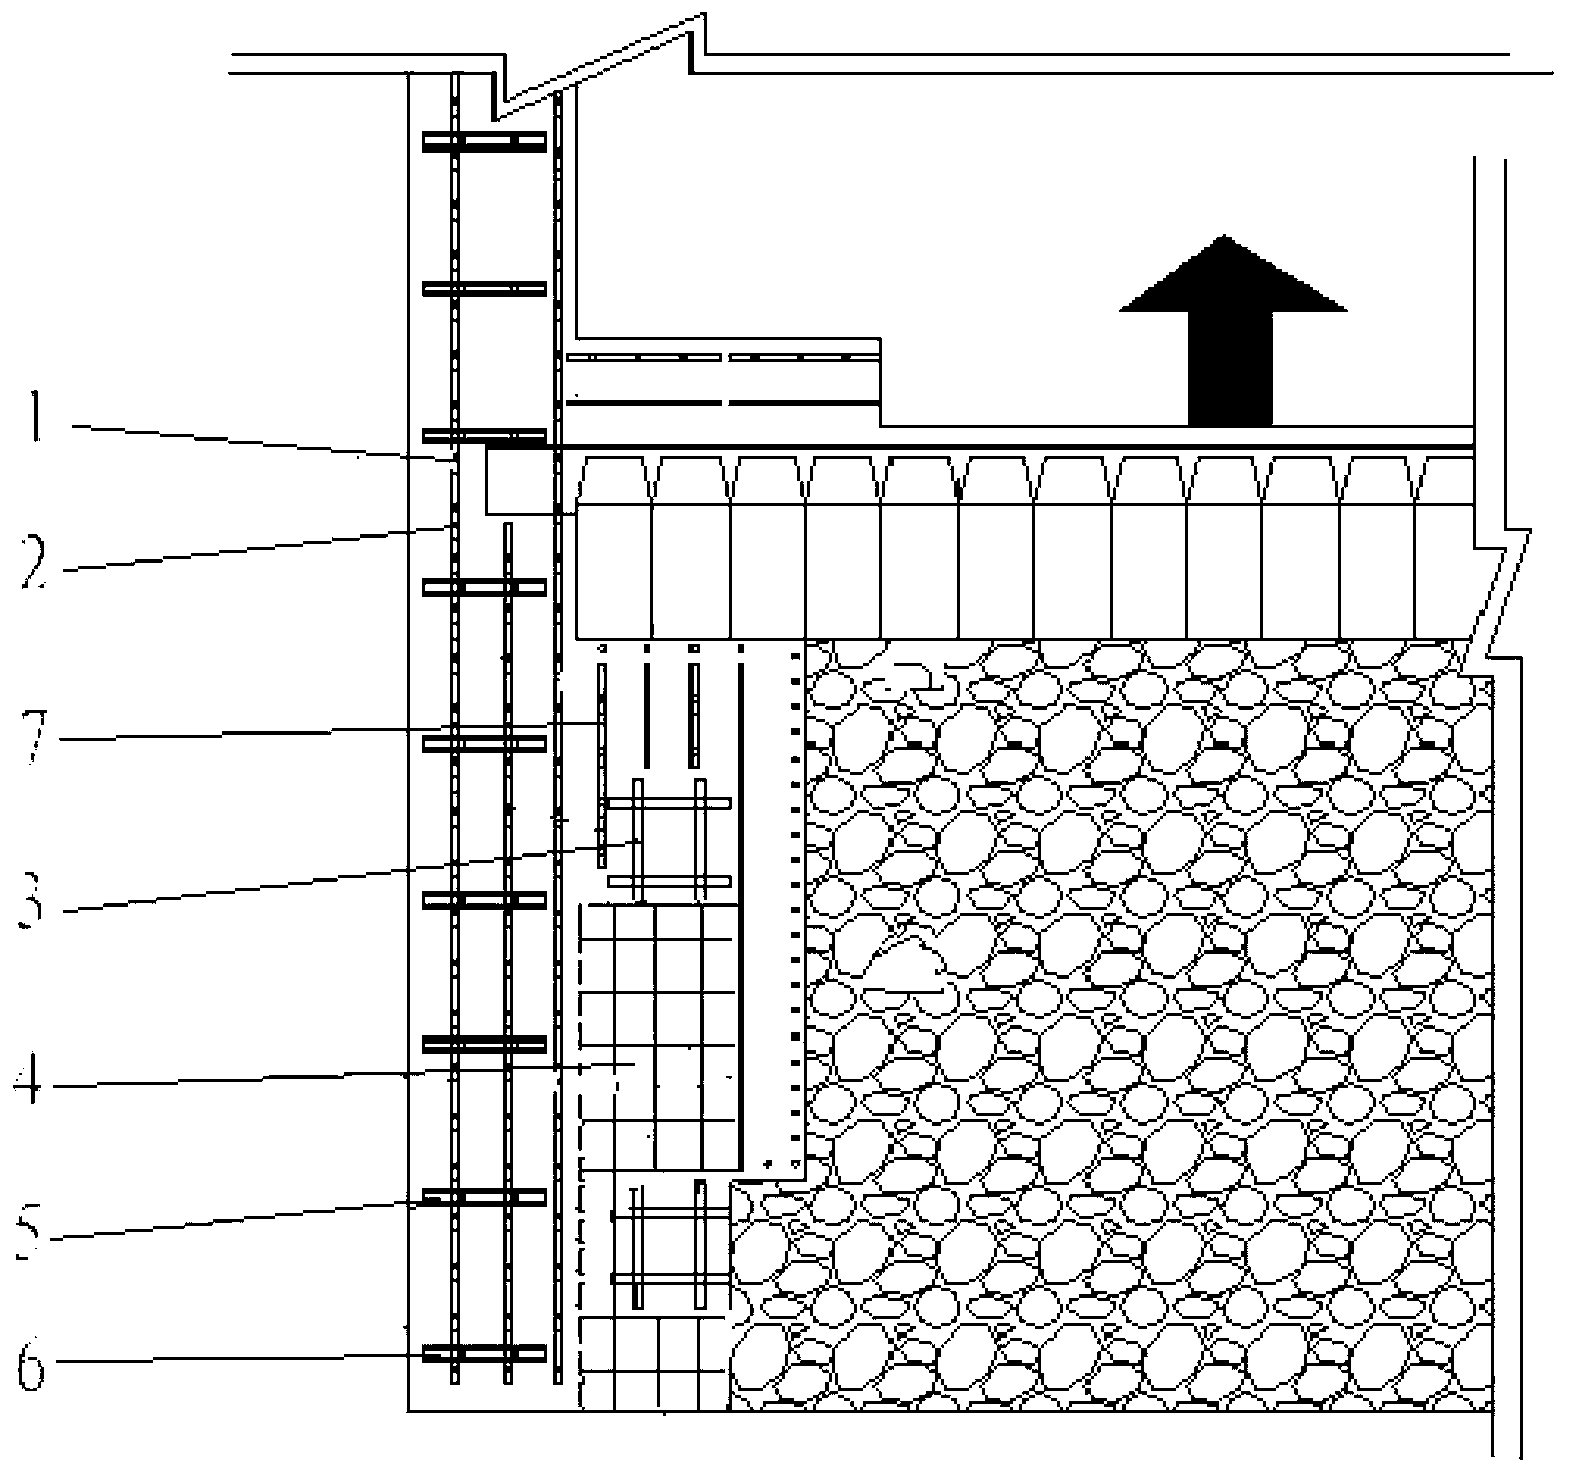 Composite roof thin seam fully-mechanized coal mining face gob-side entry retaining method